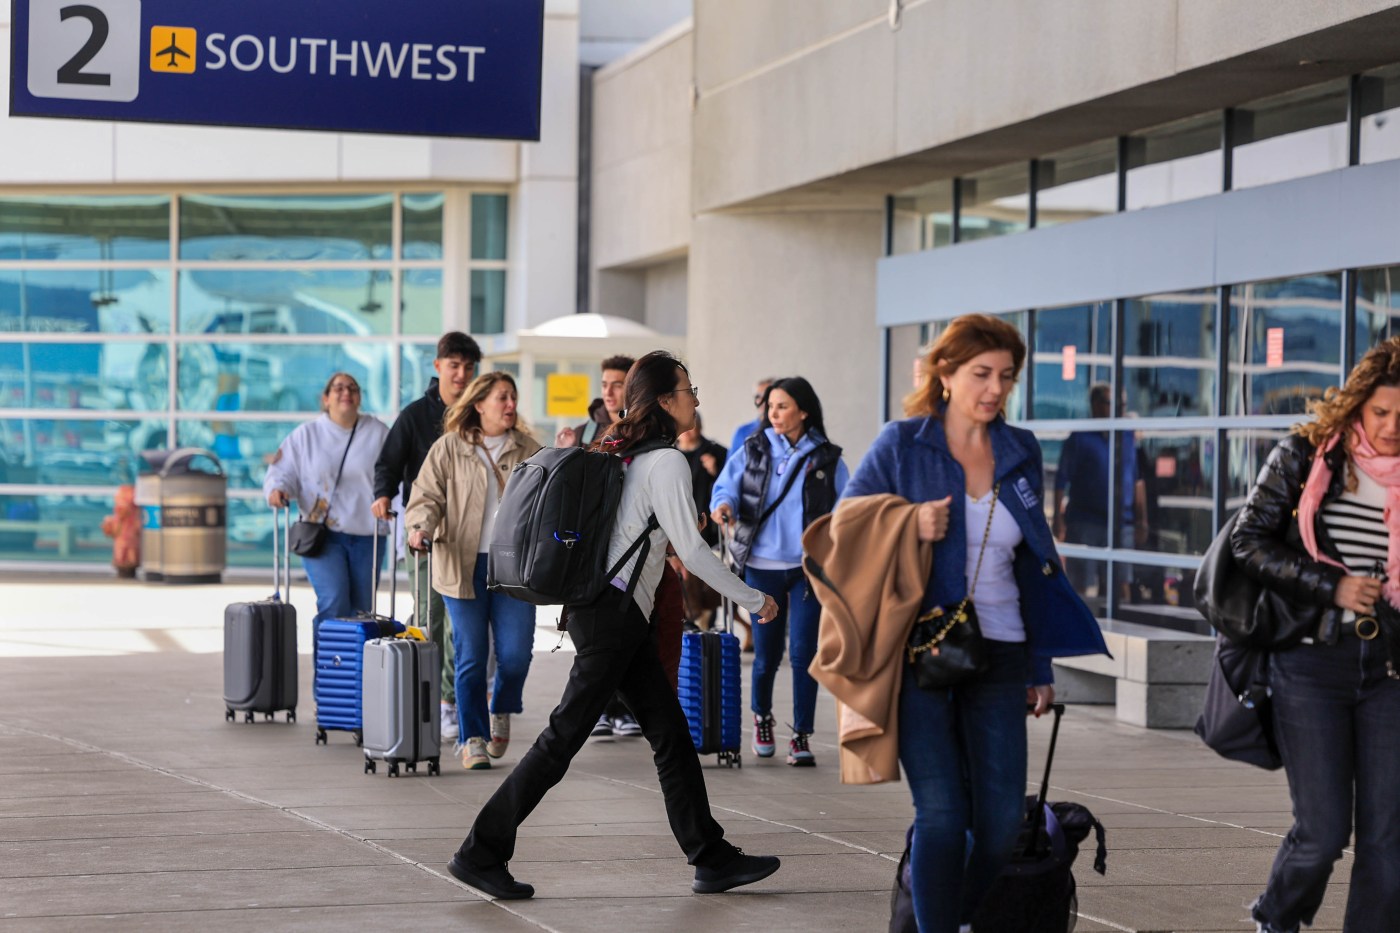 oakland-airport-to-be-renamed-‘san-francisco-bay-oakland-international-airport’-after-commission-vote